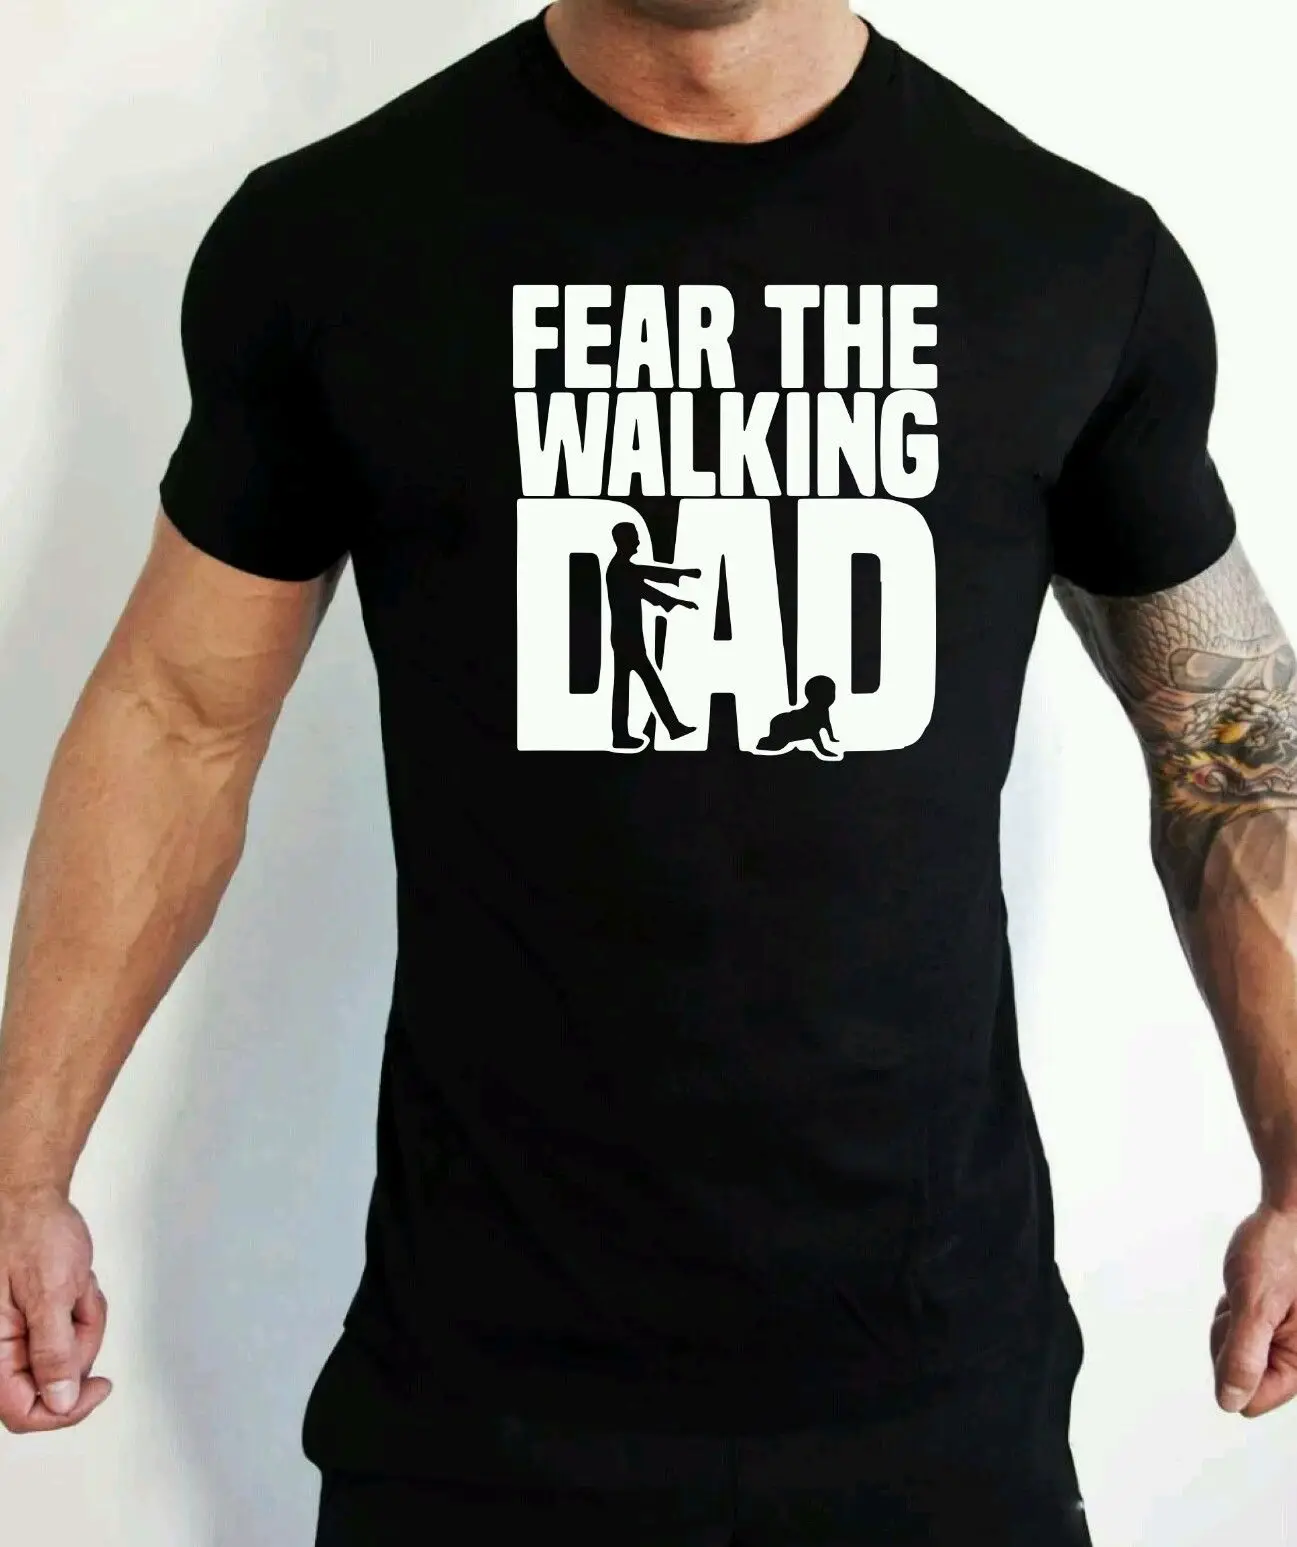 

Fear The Walking Dad T-Shirt Funny Humour The Walking Dead Fathers Day Summer Cotton O-Neck Short Sleeve T Shirt Gift Size S-3XL